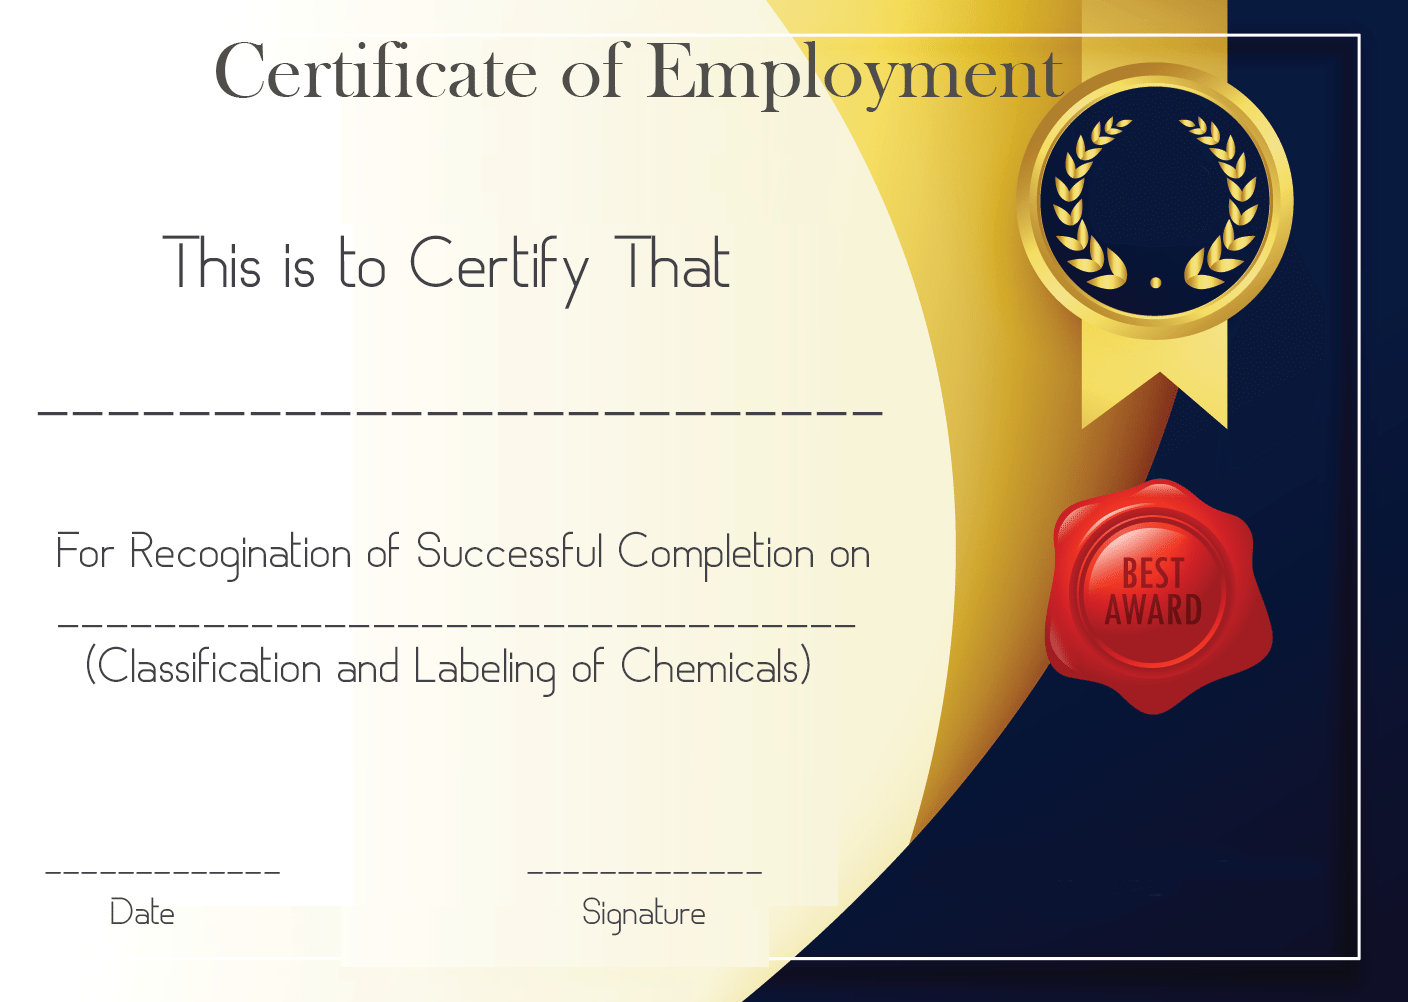 Free Sample Certificate Of Employment Template | Certificate In Certificate Of Employment Template